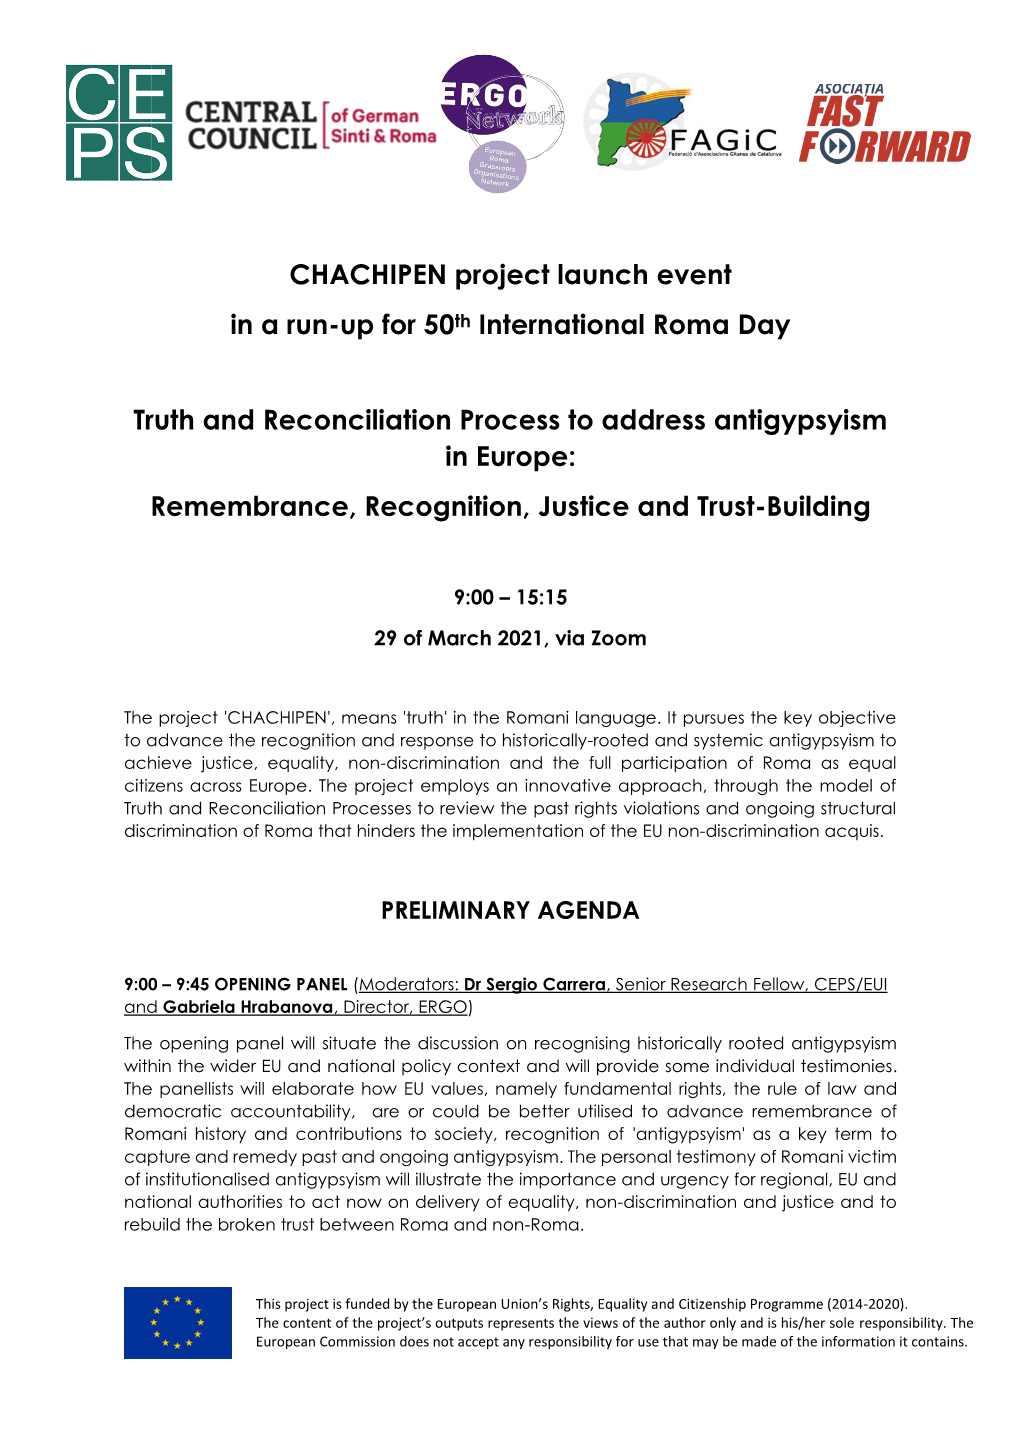 CHACHIPEN Project Launch Event in a Run-Up for 50Th International Roma Day